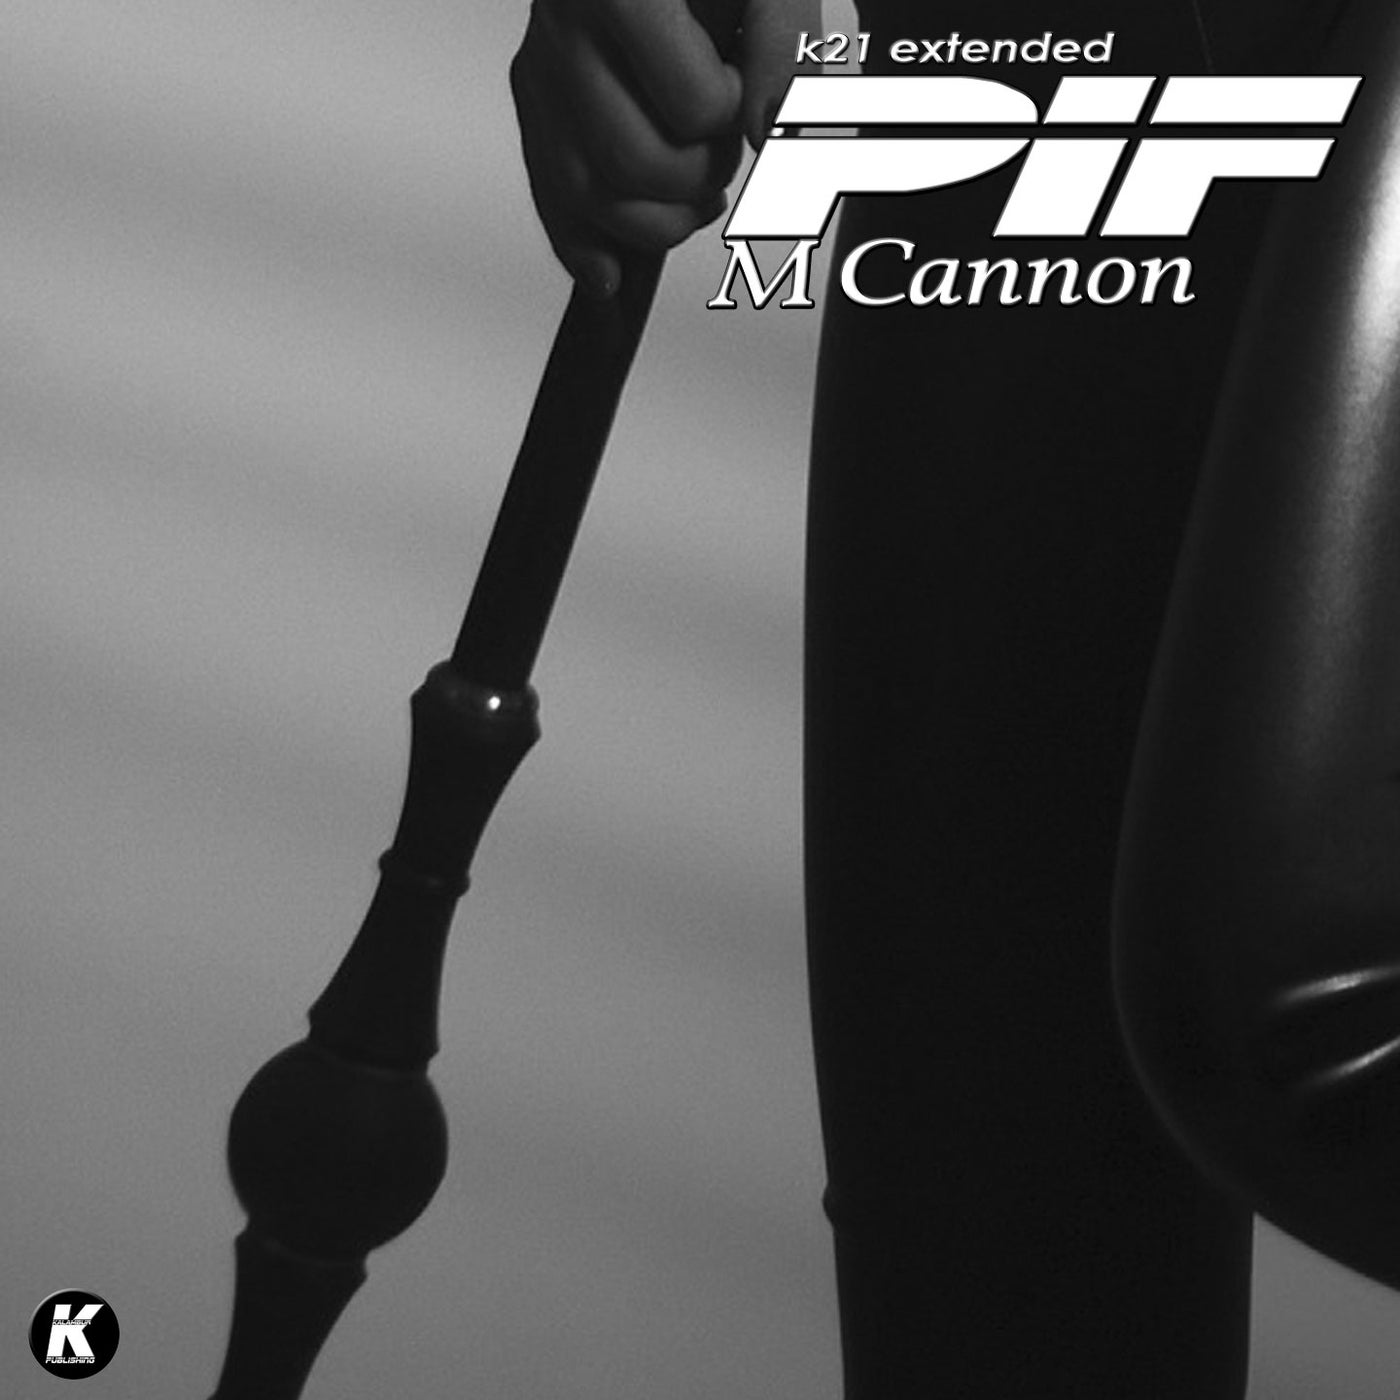 M Cannon (K21extended)